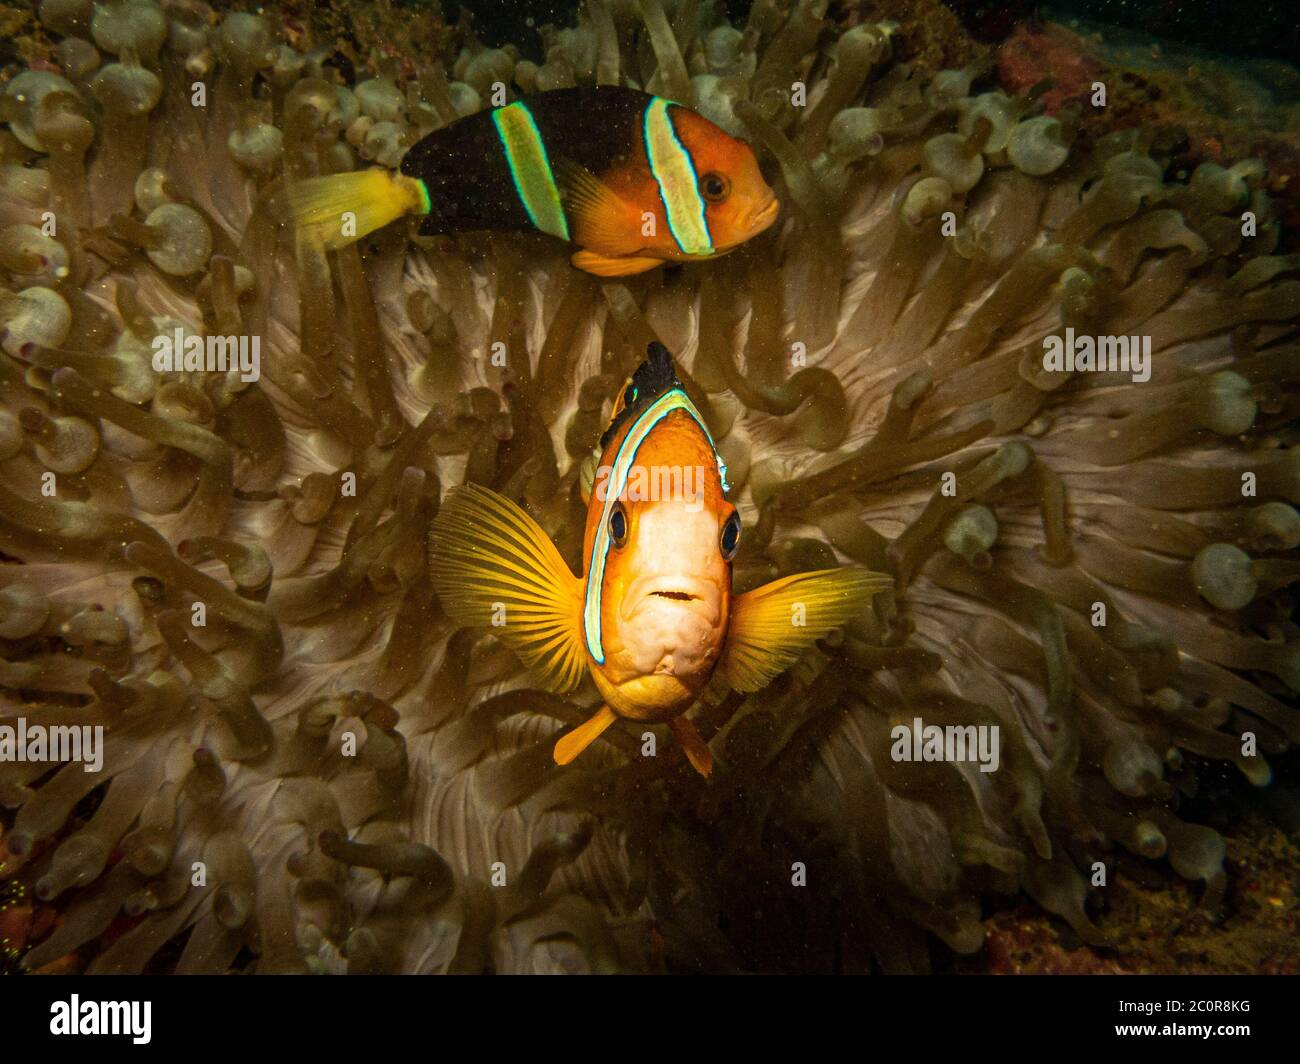 Clownfish (Clark's enemonefish) at its home in a stinging sea anemone Stock Photo